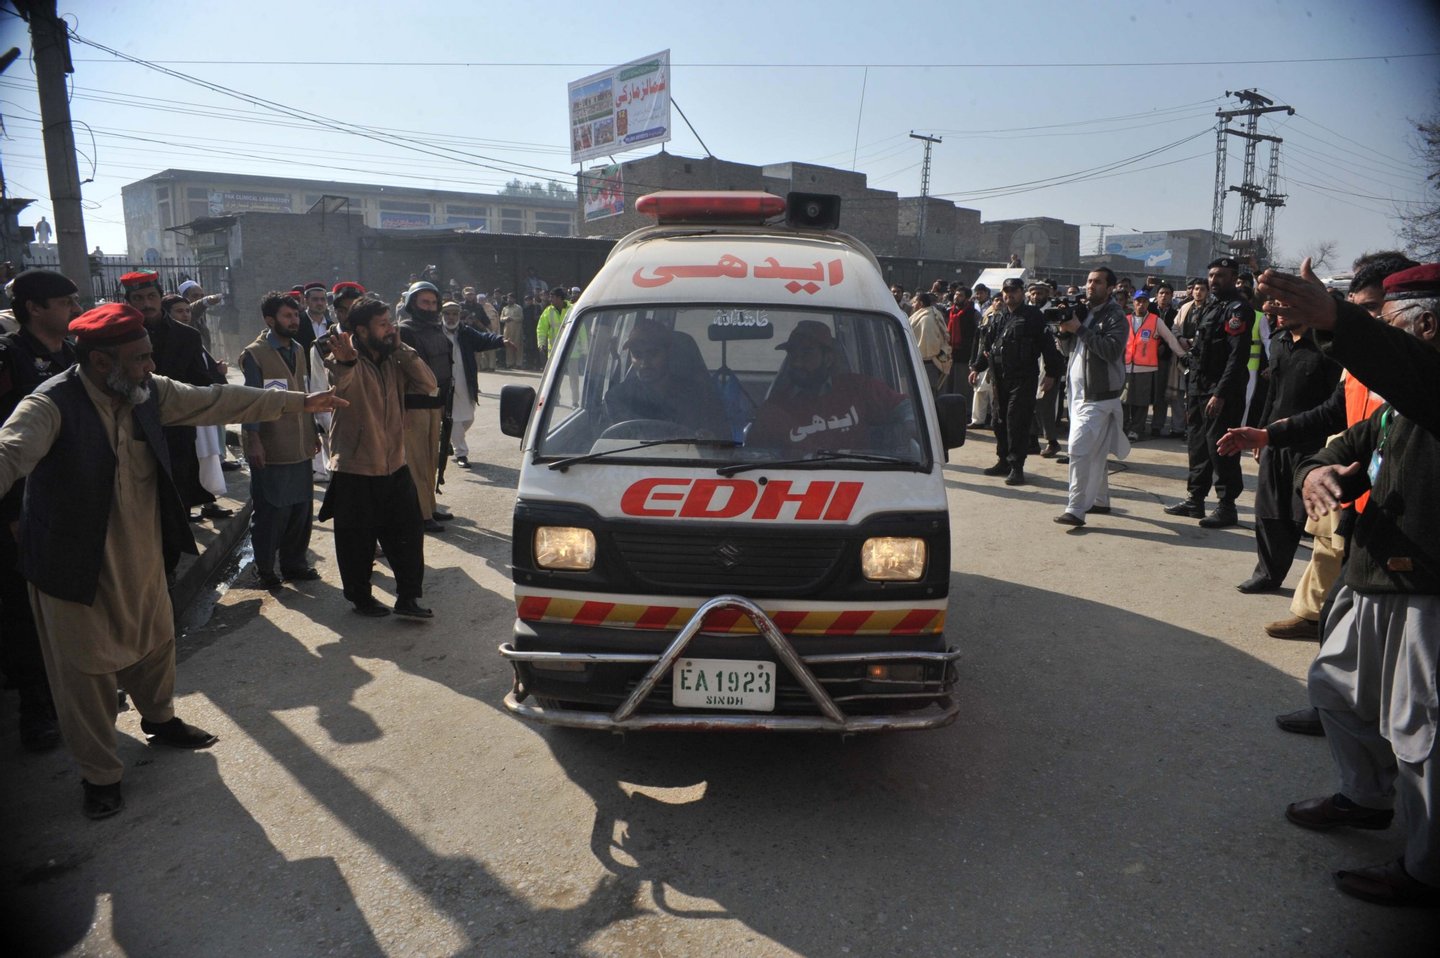 An ambulance carrying injured victims enters a hospital following an attack by gunmen at Bacha Khan university in Charsadda, about 50 kilometres from Peshawar, on January 20, 2016. At least 21 people died in an armed assault on a university in Pakistan on January 20, where witnesses reported two large explosions as security forces moved in under dense fog to halt the bloodshed. AFP PHOTO / Hasham AHMED / AFP / HASHAM AHMED (Photo credit should read HASHAM AHMED/AFP/Getty Images)